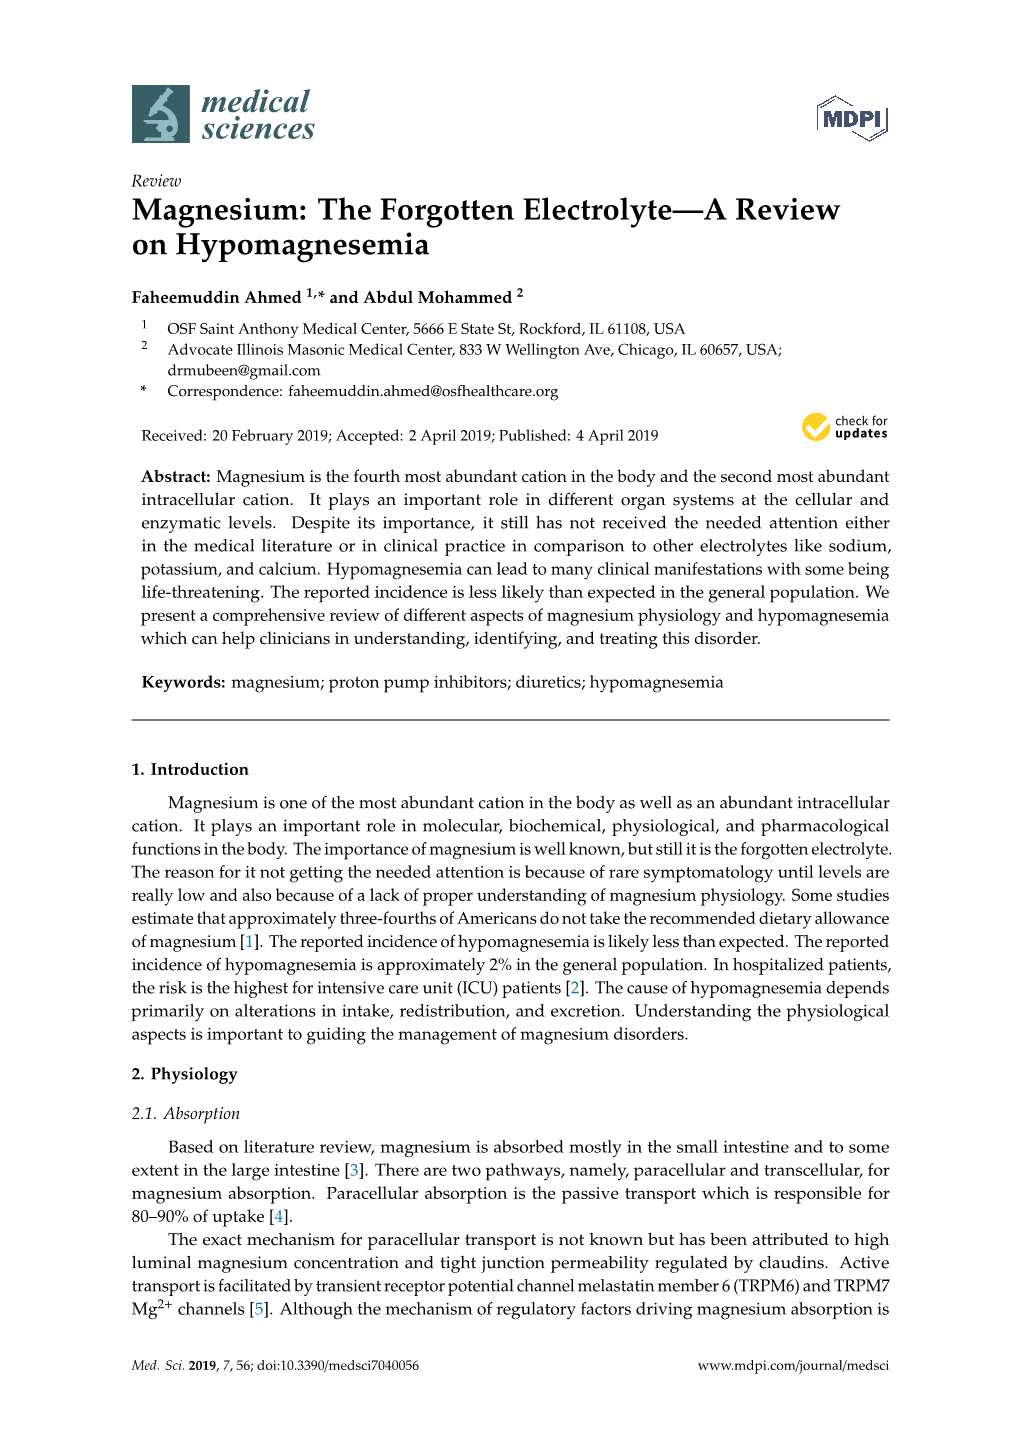 Magnesium: the Forgotten Electrolyte—A Review on Hypomagnesemia